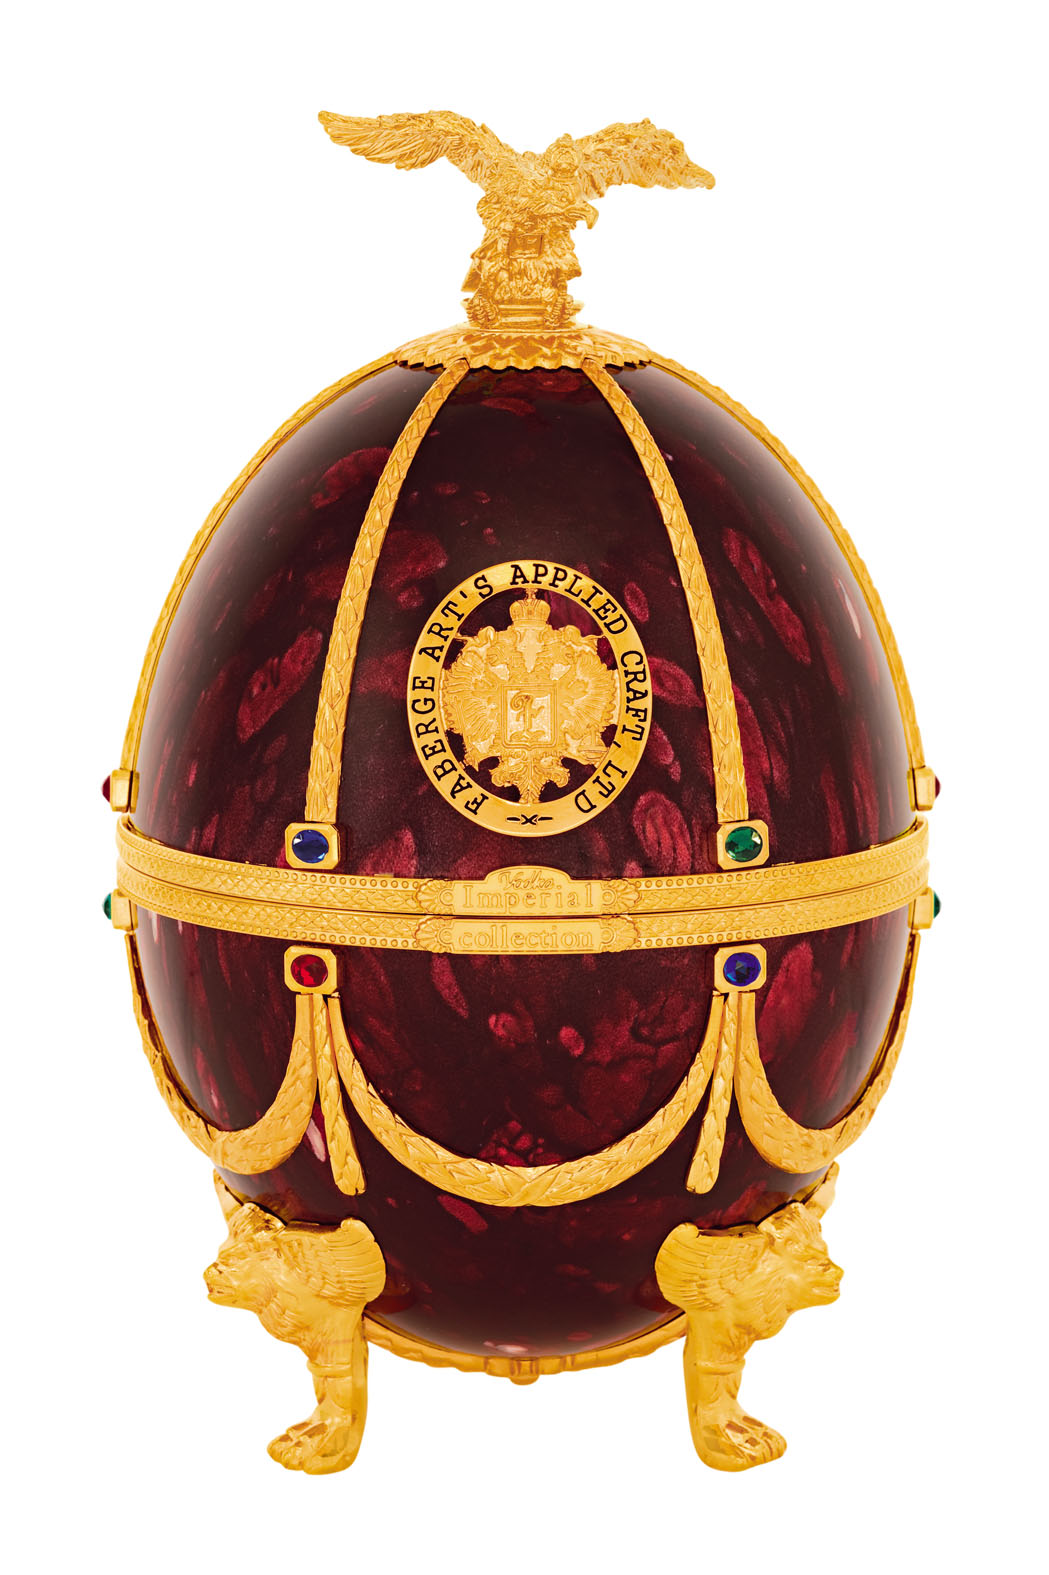 Vodka Imperial Collection Ladoga Oeuf Fabergé marbré rouge www.luxfood-shop.fr